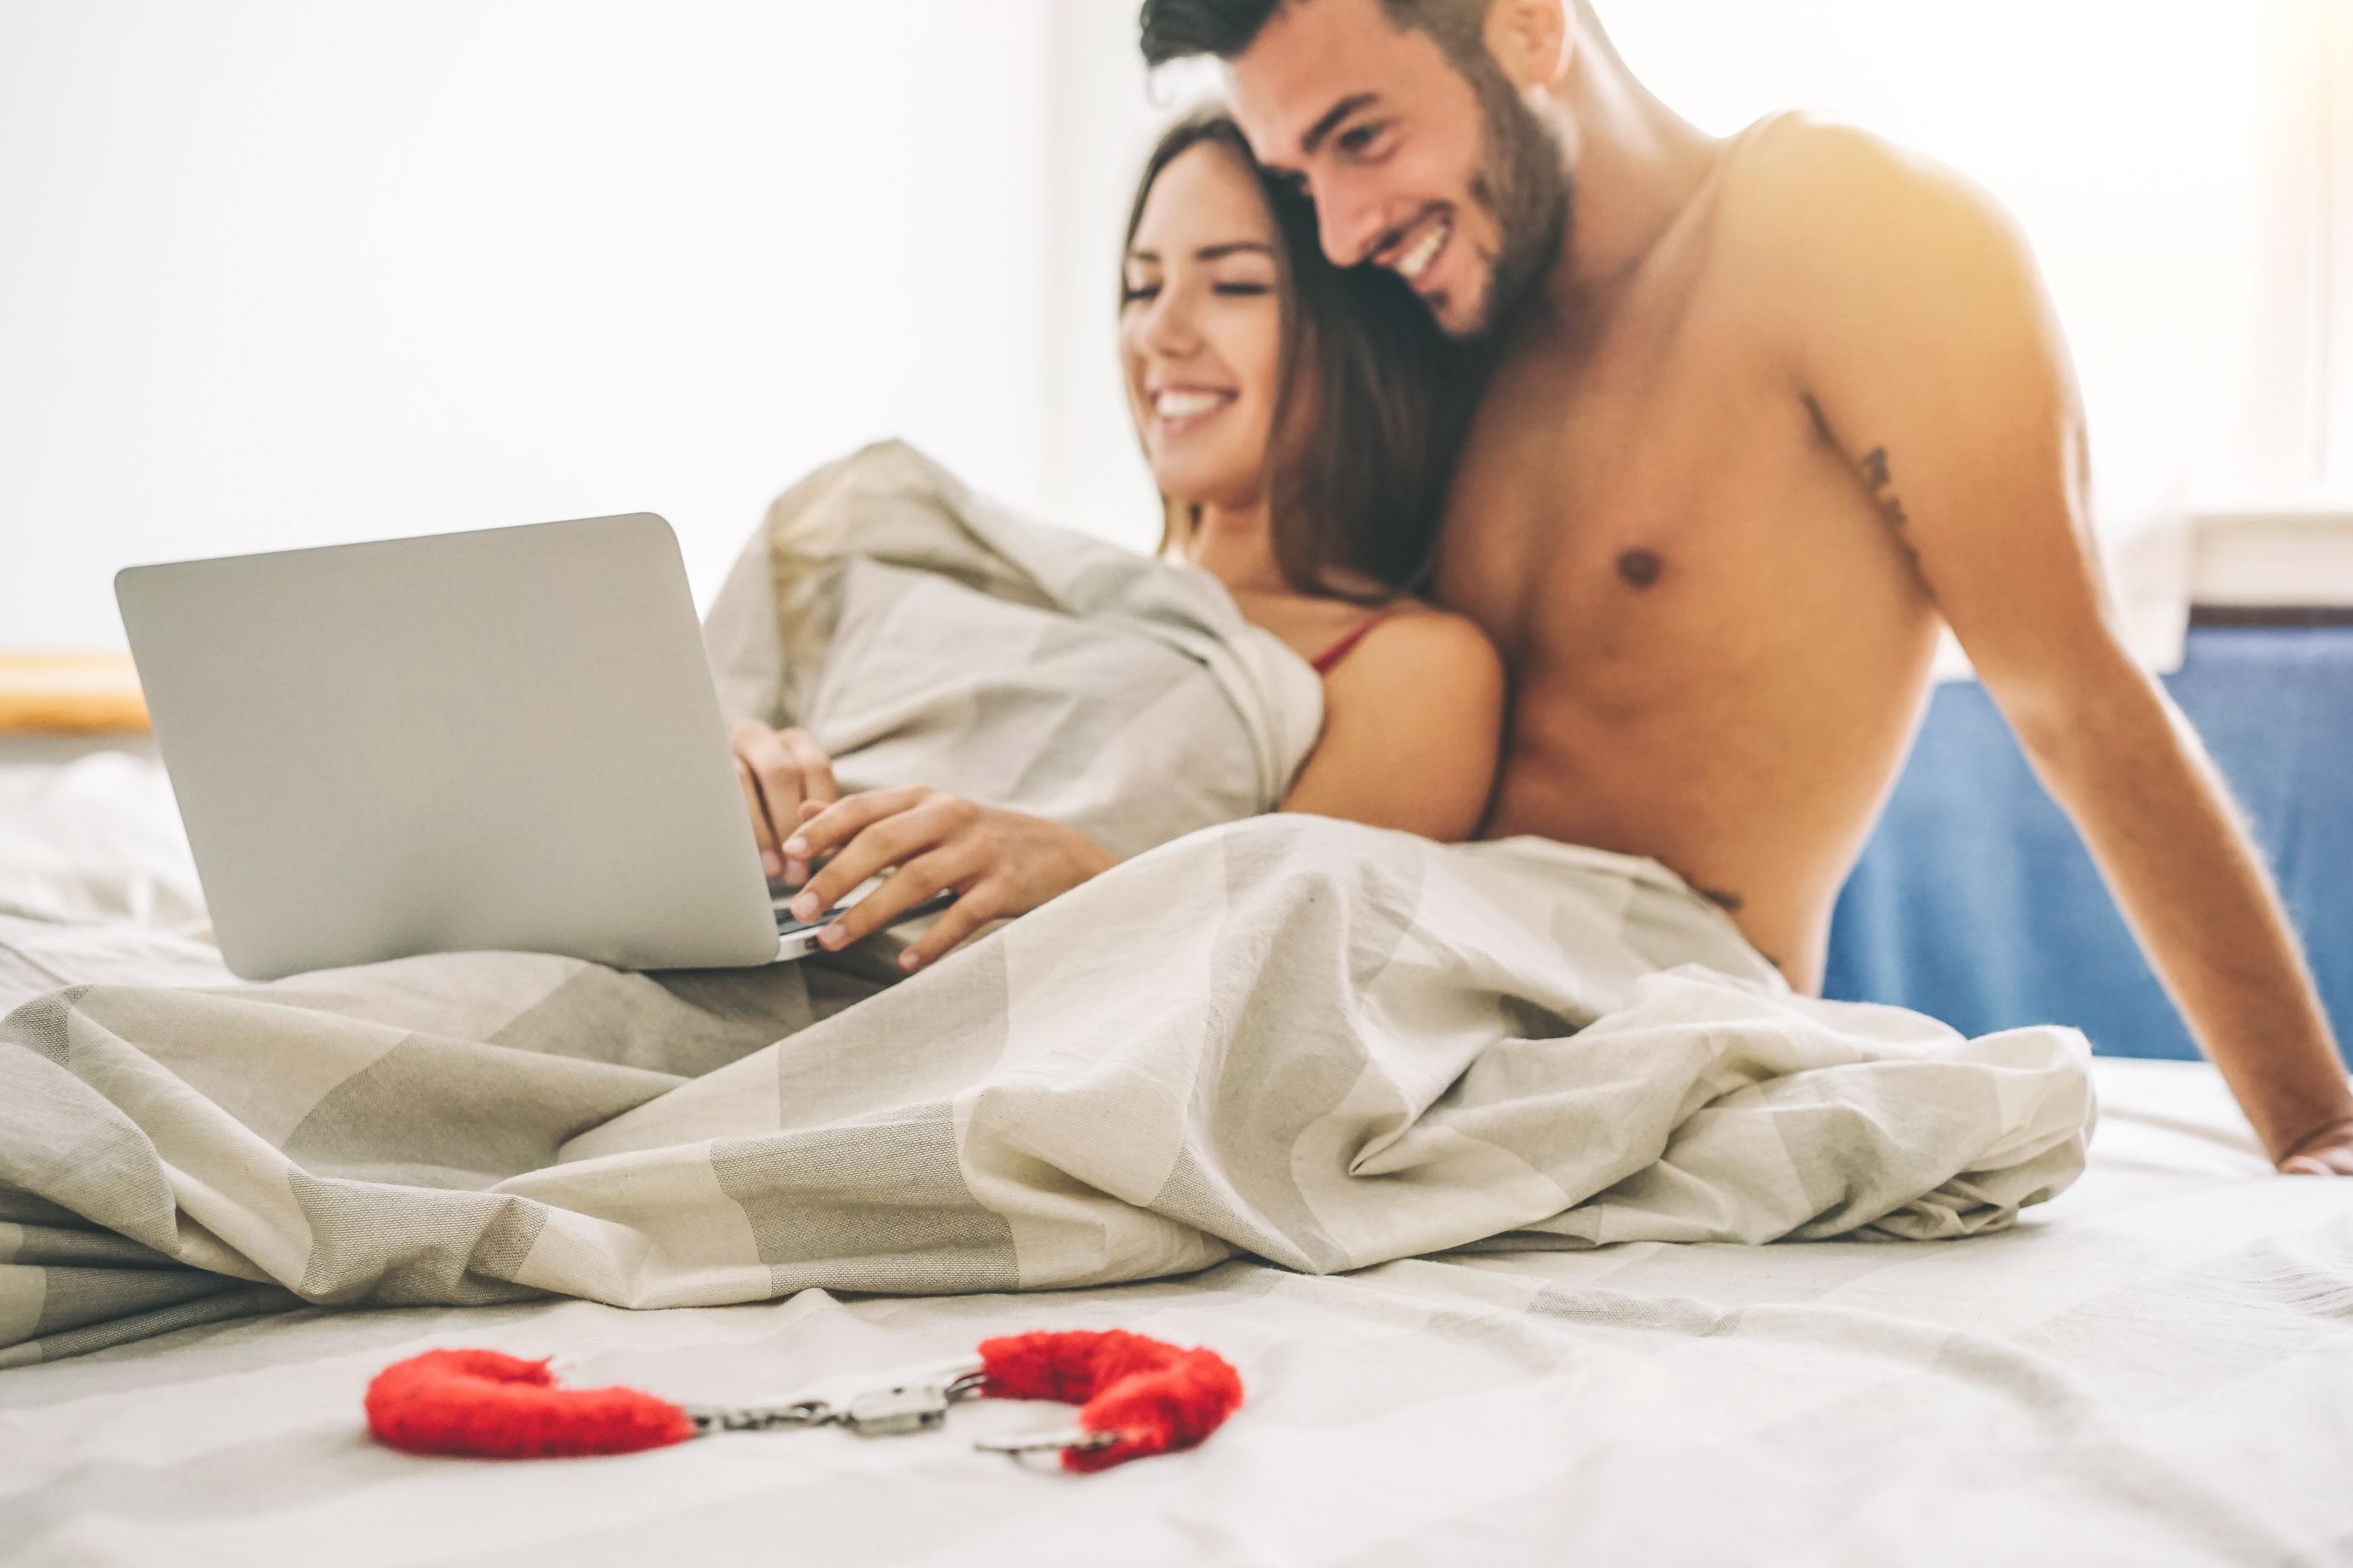 A man and woman in bed. | Source: Shutterstock